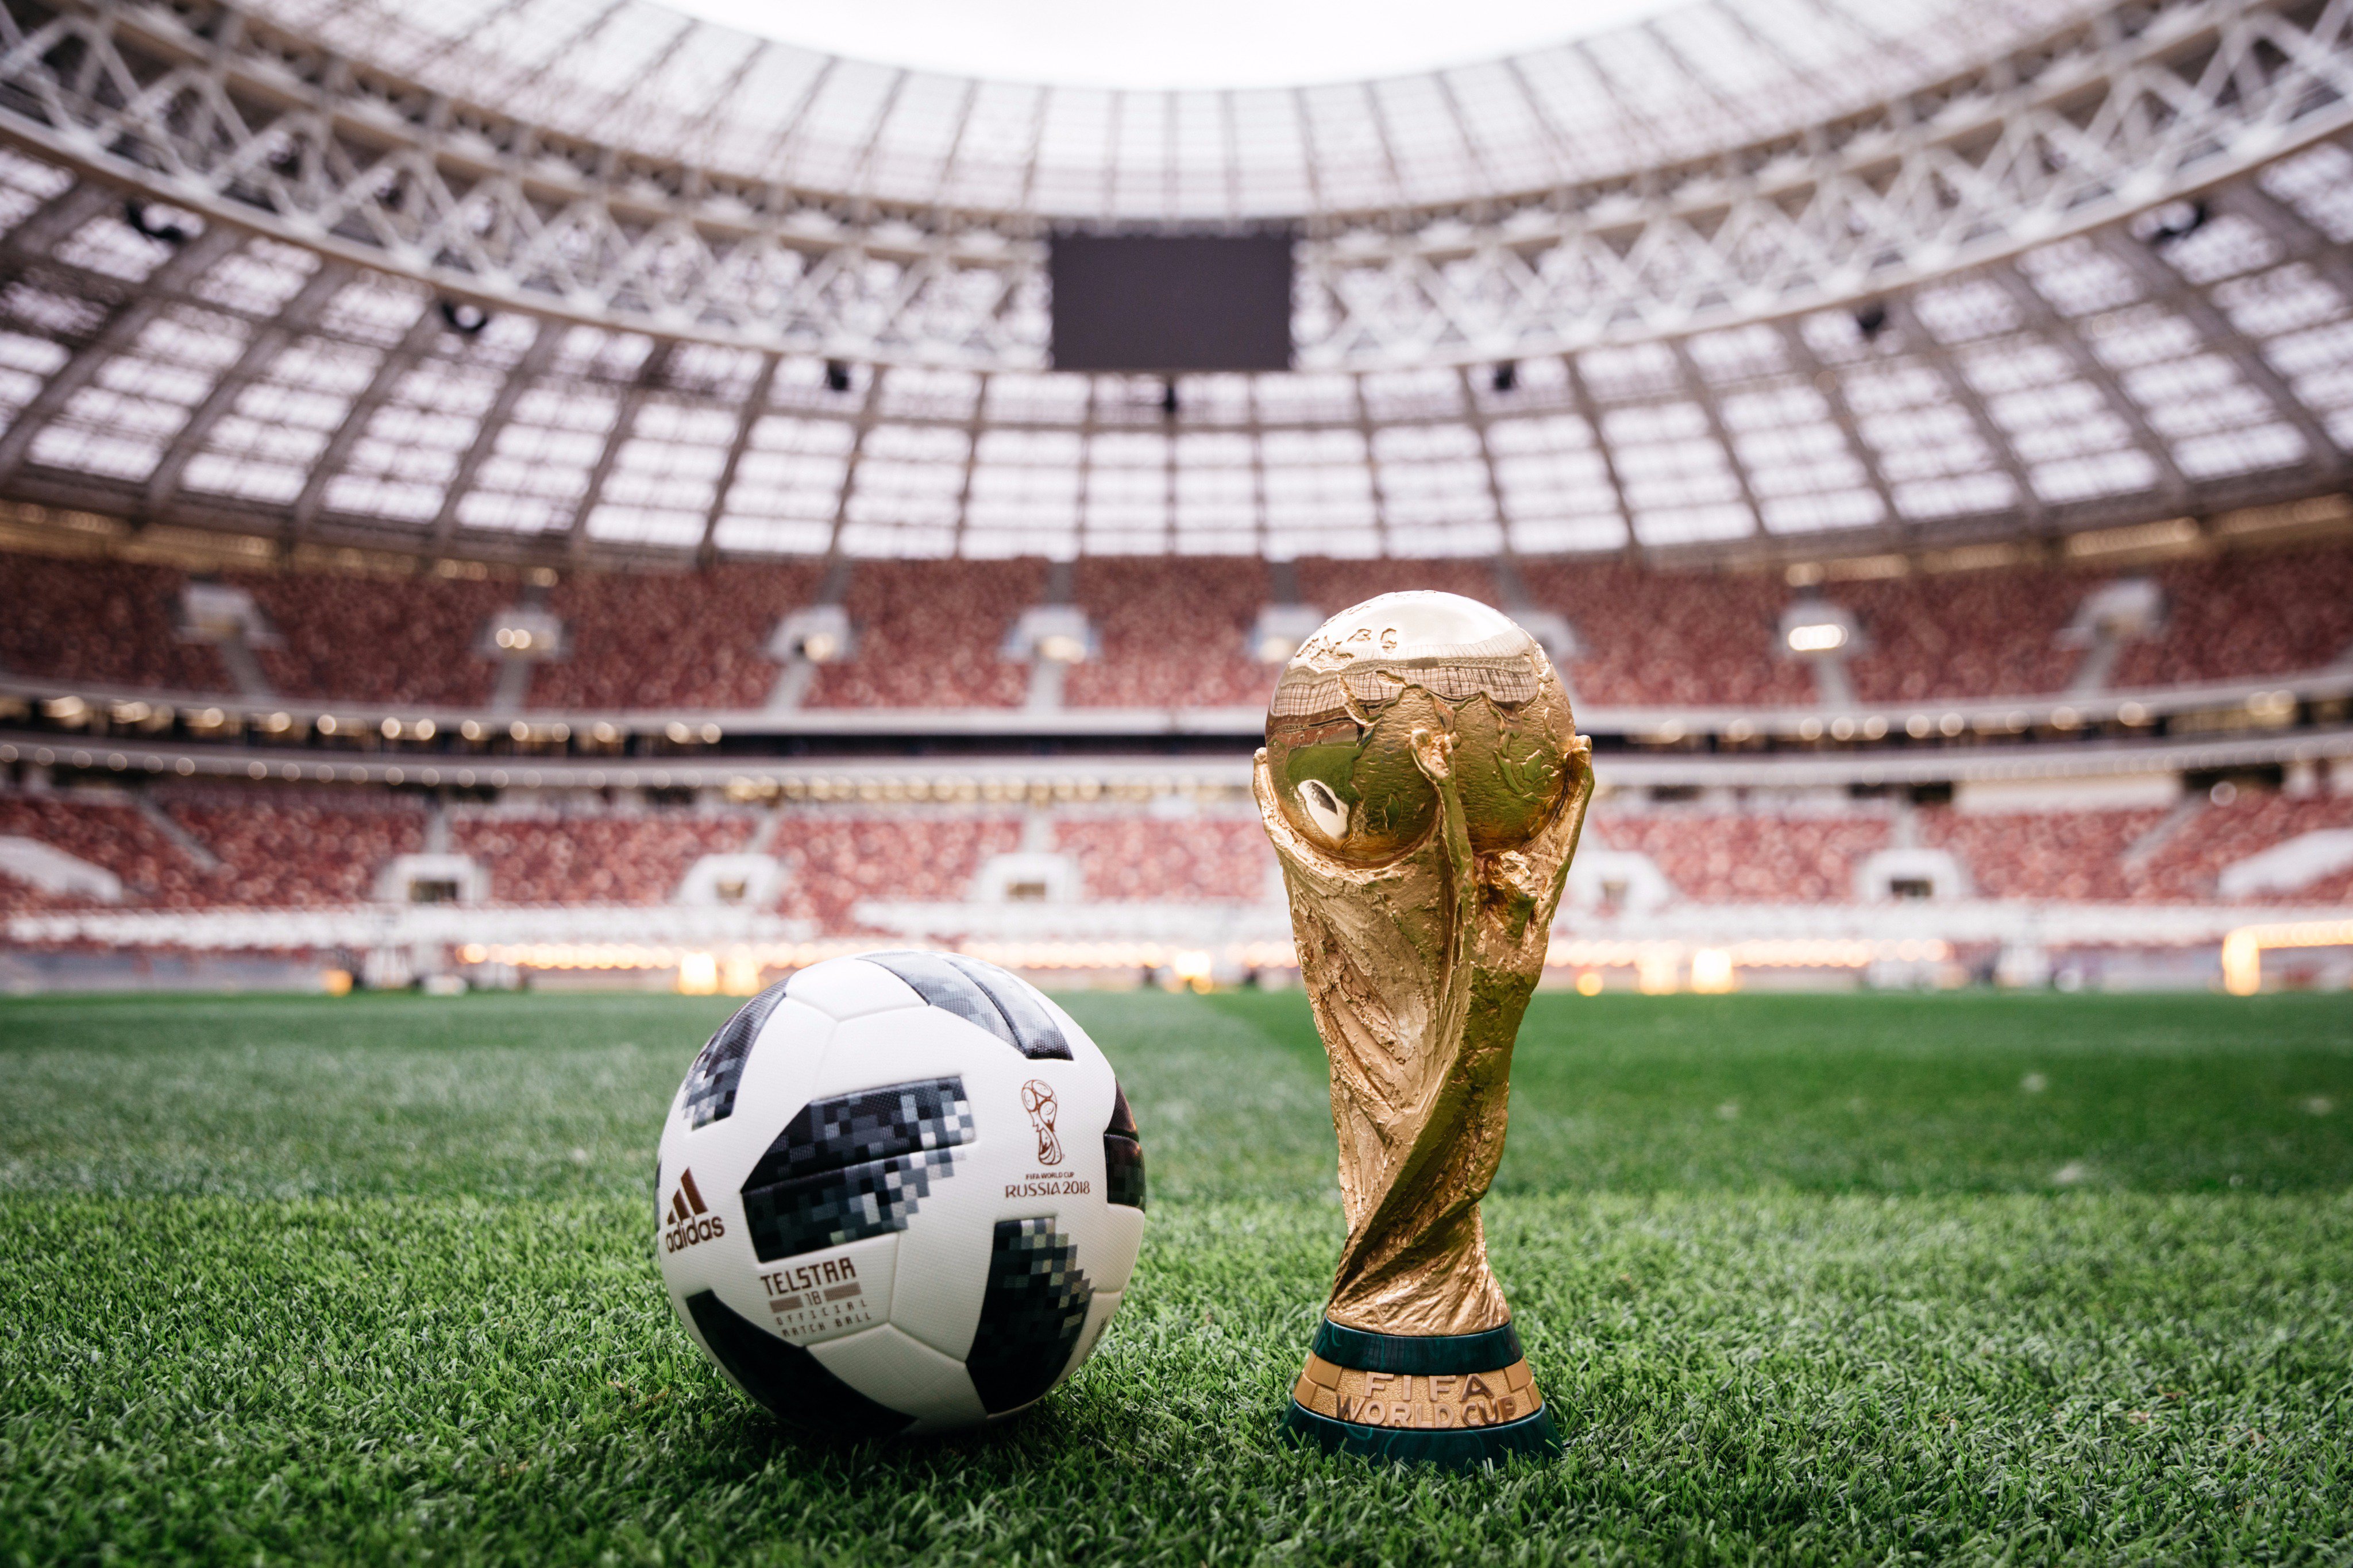 FIFA World Cup on X: "Introducing Telstar 18 - the Official Match Ball for  the 2018 FIFA #WorldCup! https://t.co/nOqseEElQp" / X